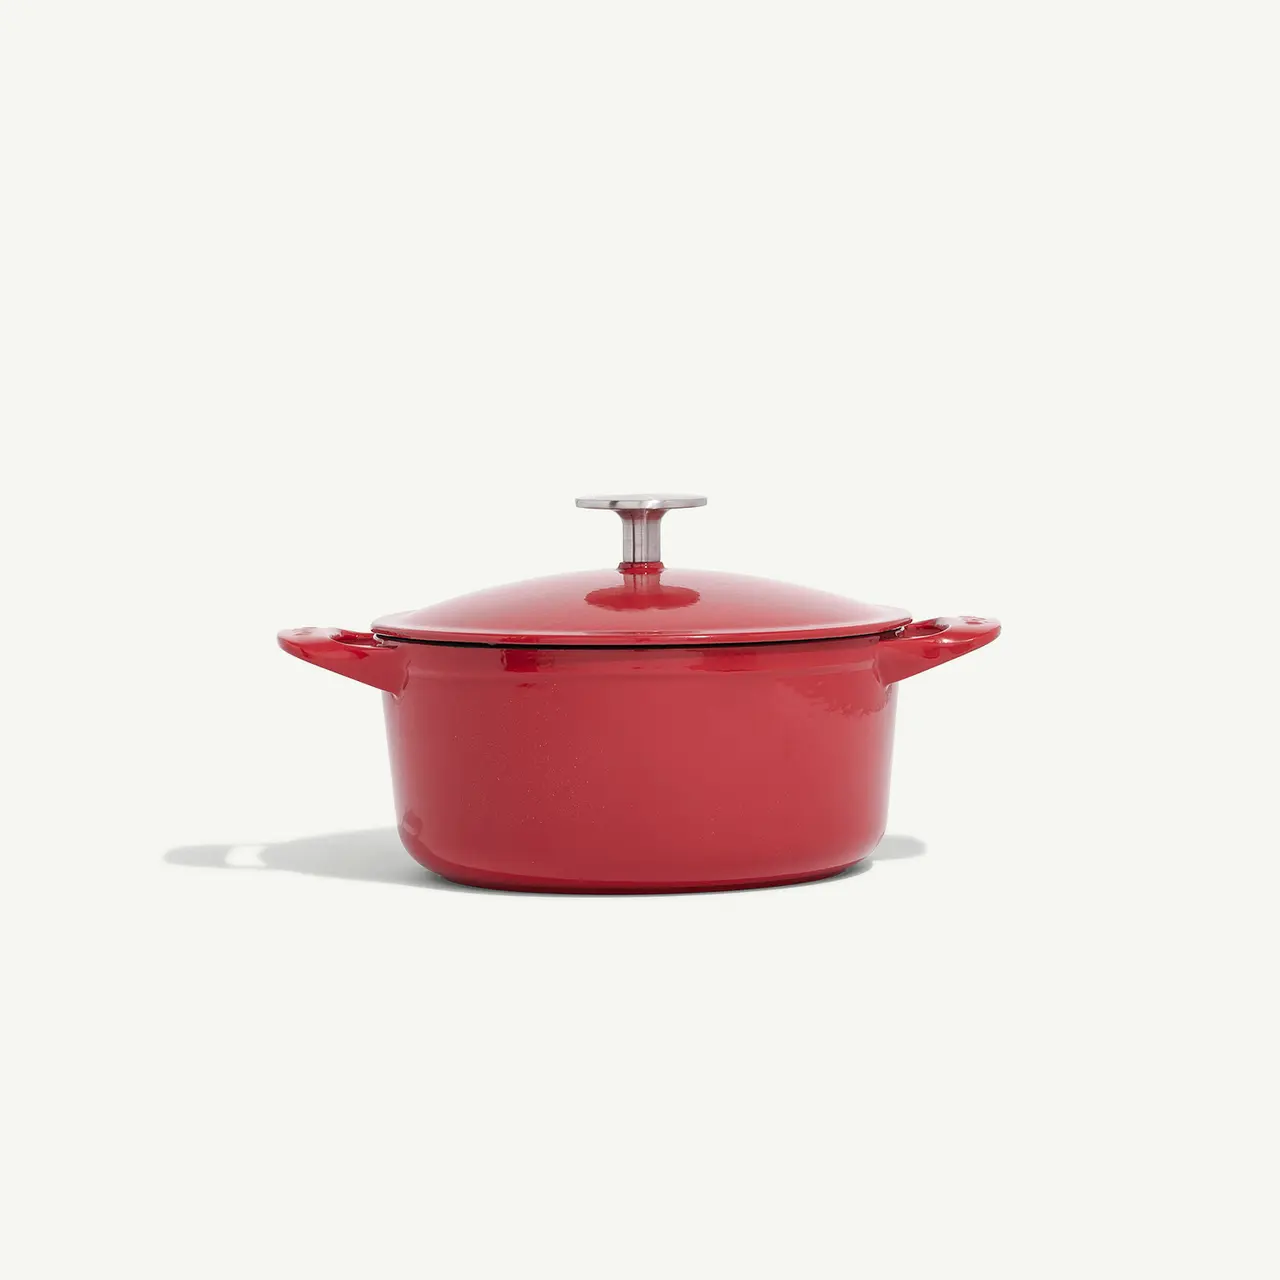 A red cooking pot with a lid centered against a white background.